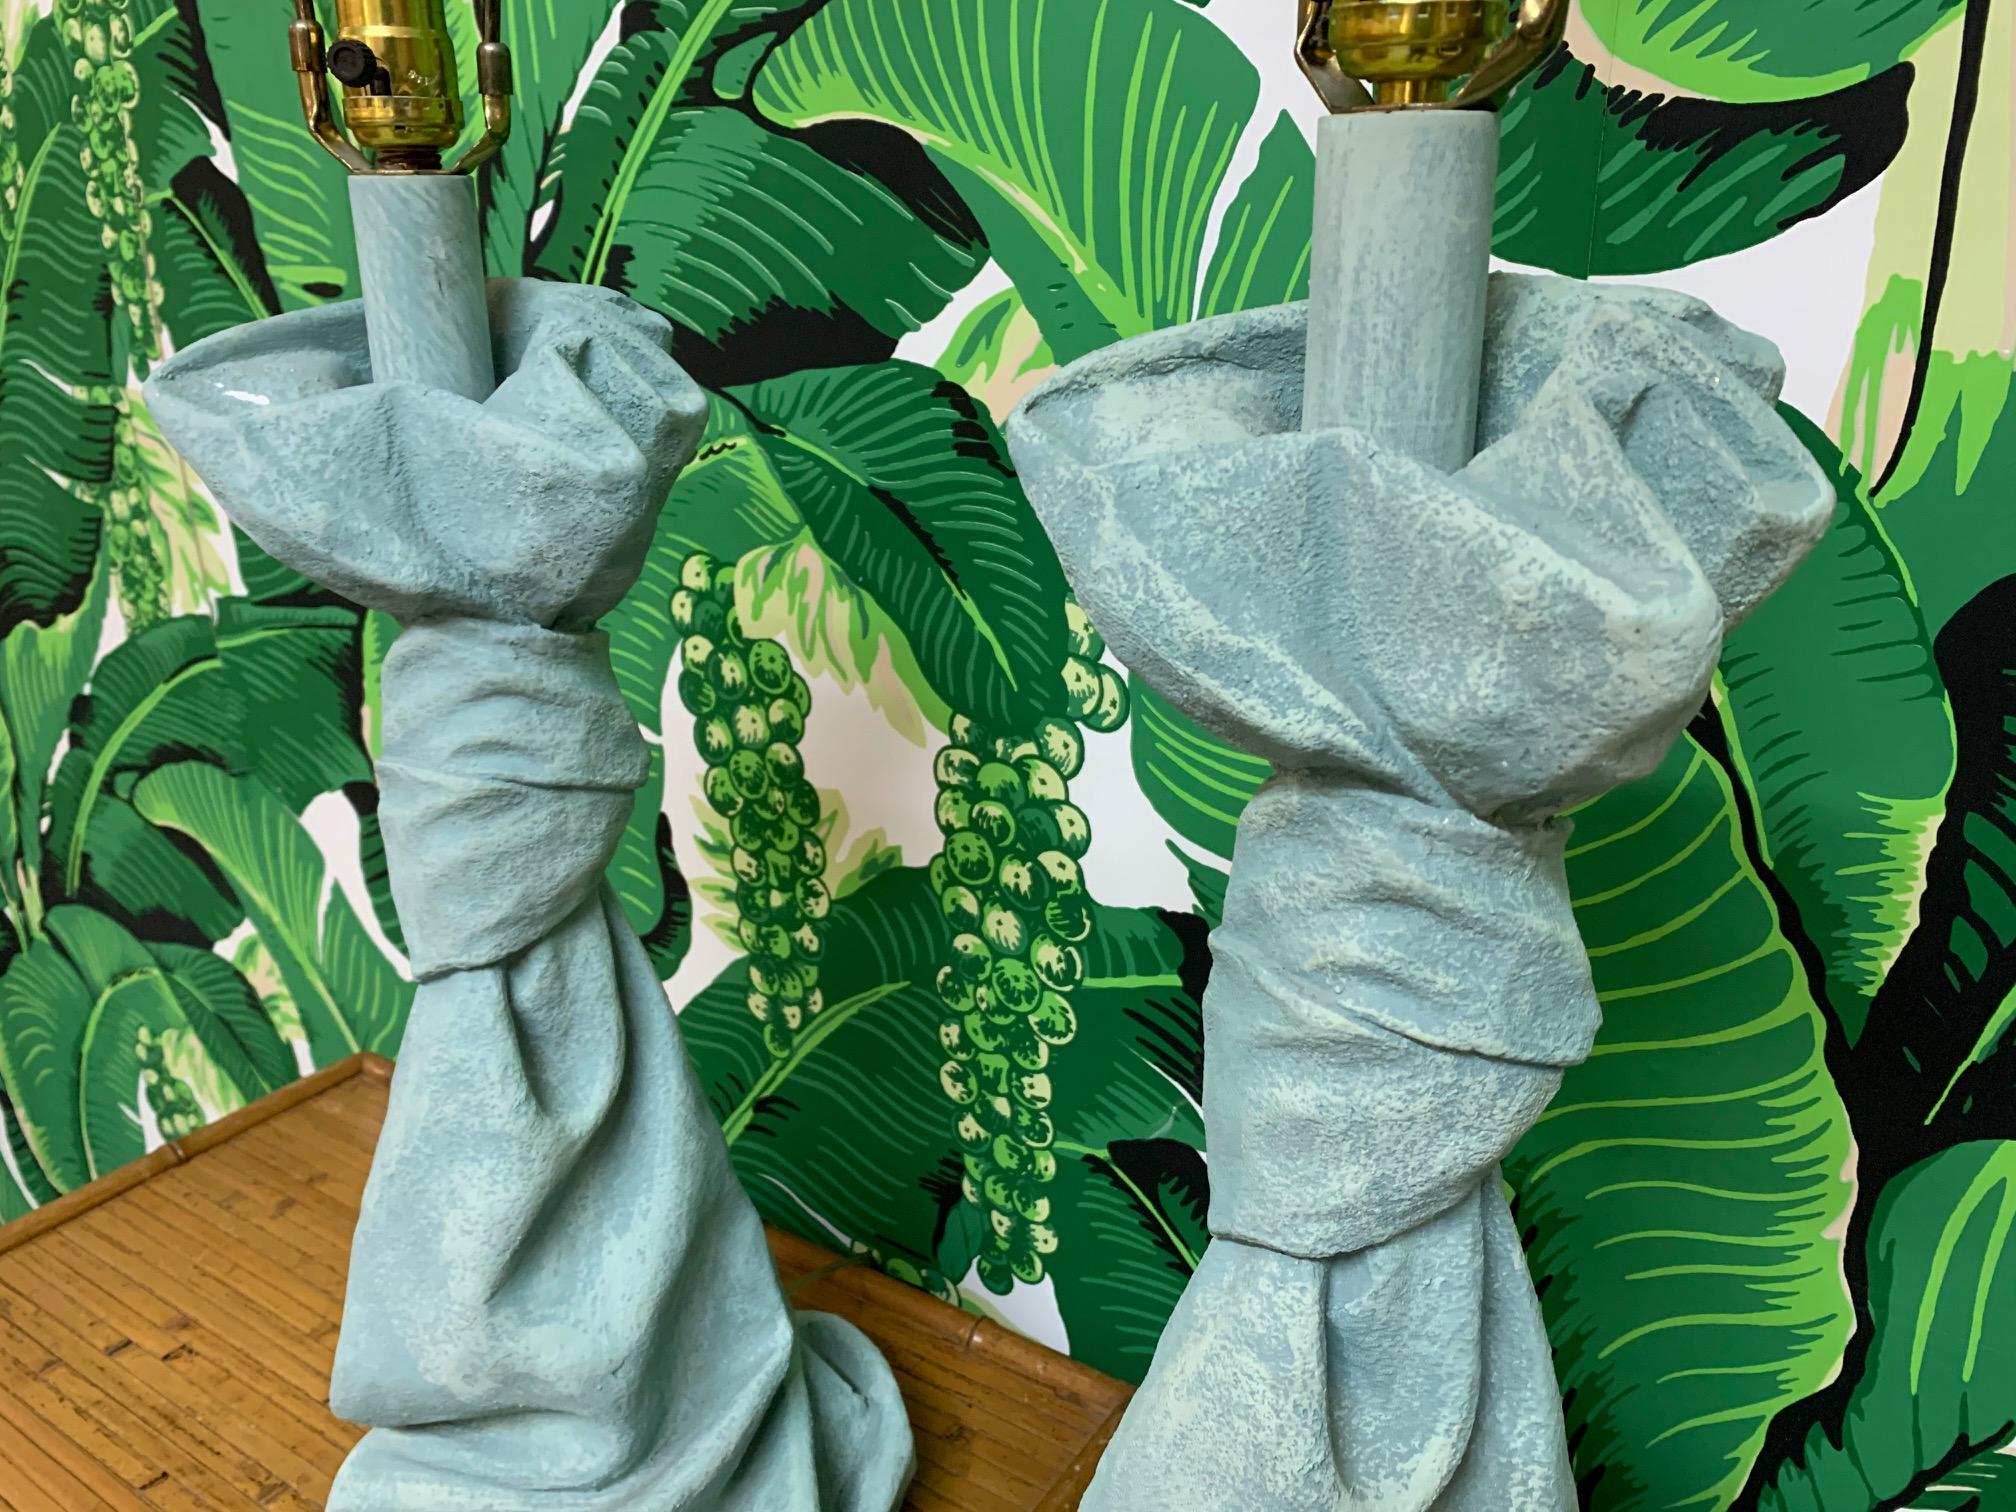 Pair of table lamps in draped fabric motif in the style of John Dickinson. Heavy plaster construction. Good vintage condition with minor imperfections consistent with age.